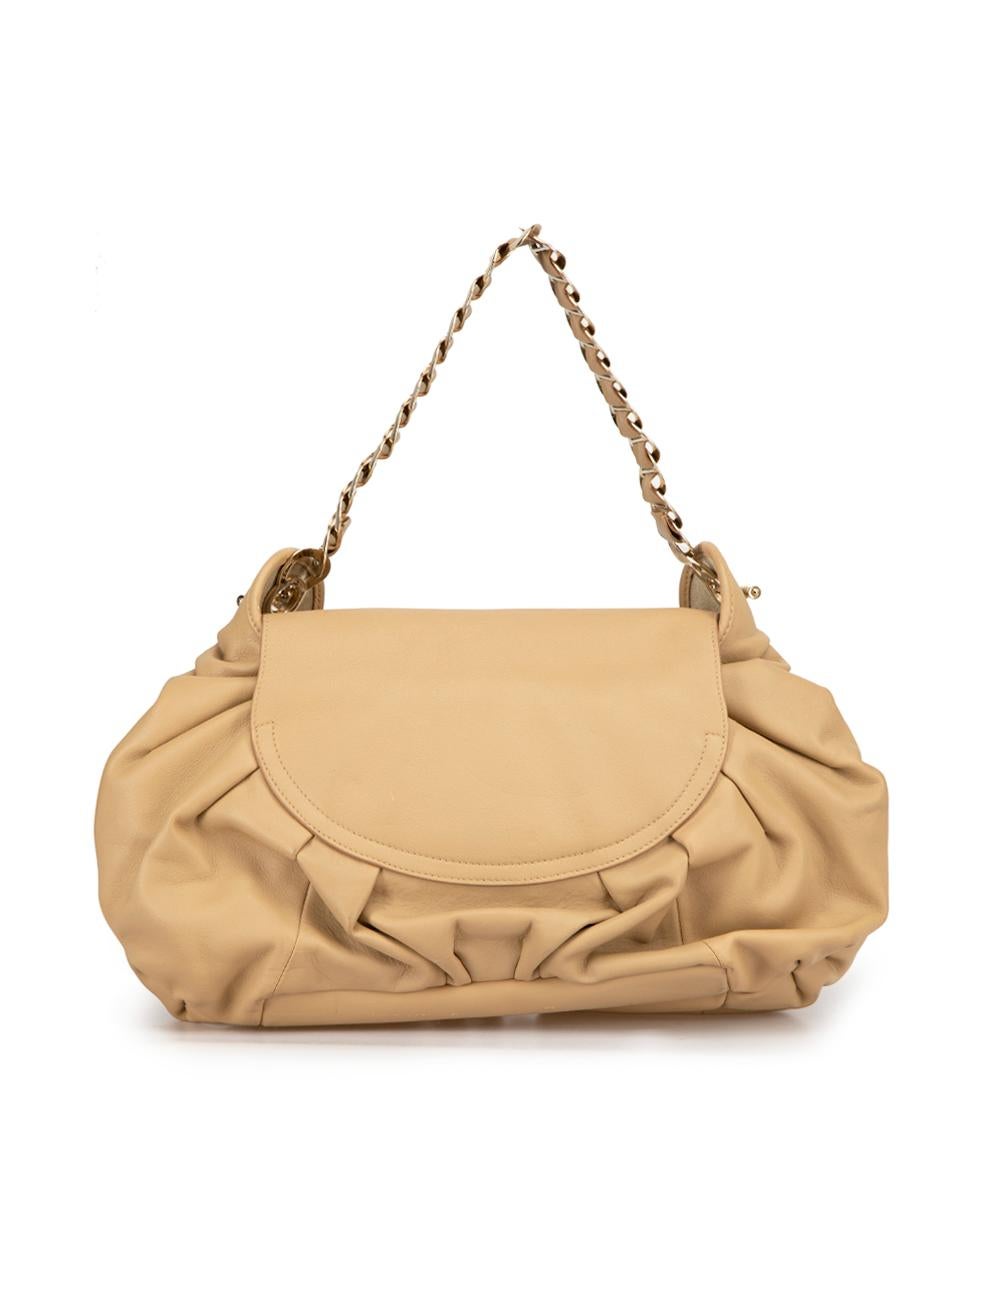 Dior Women's Beige Leather Jazz Club Shoulder Bag In Good Condition For Sale In London, GB